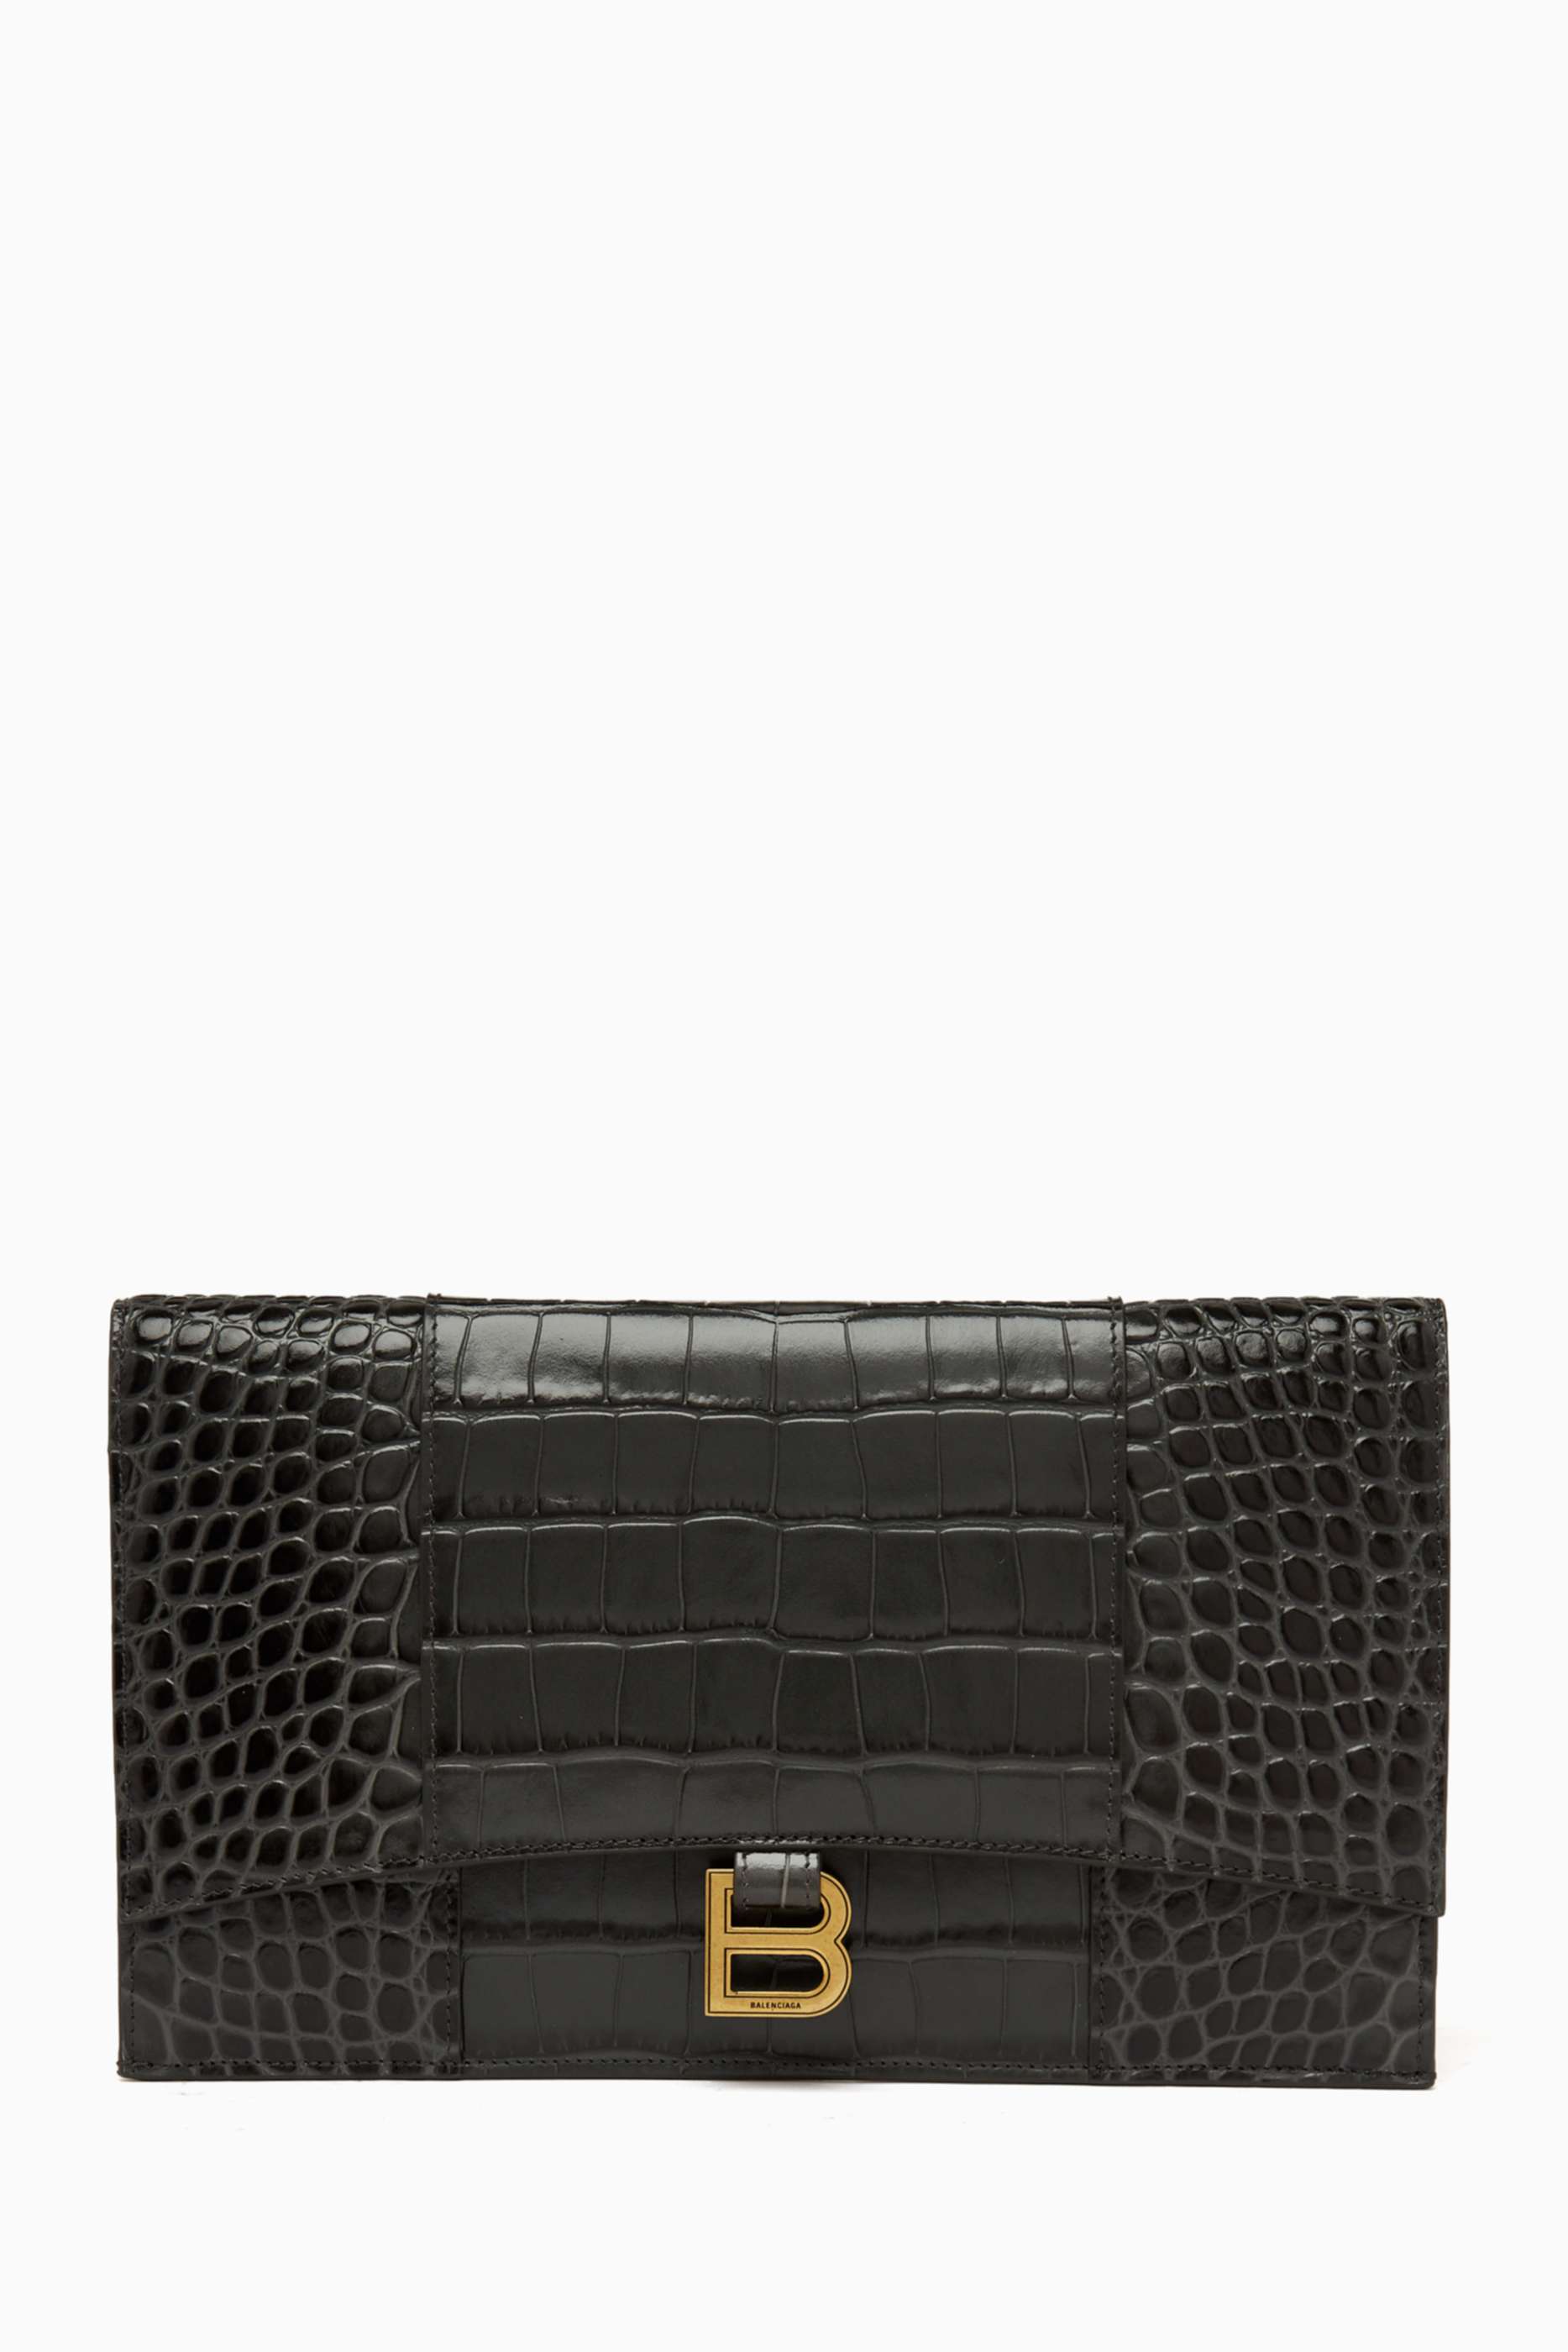 shop-balenciaga-hourglass-flat-pouch-in-croc-embossed-leather-for-women